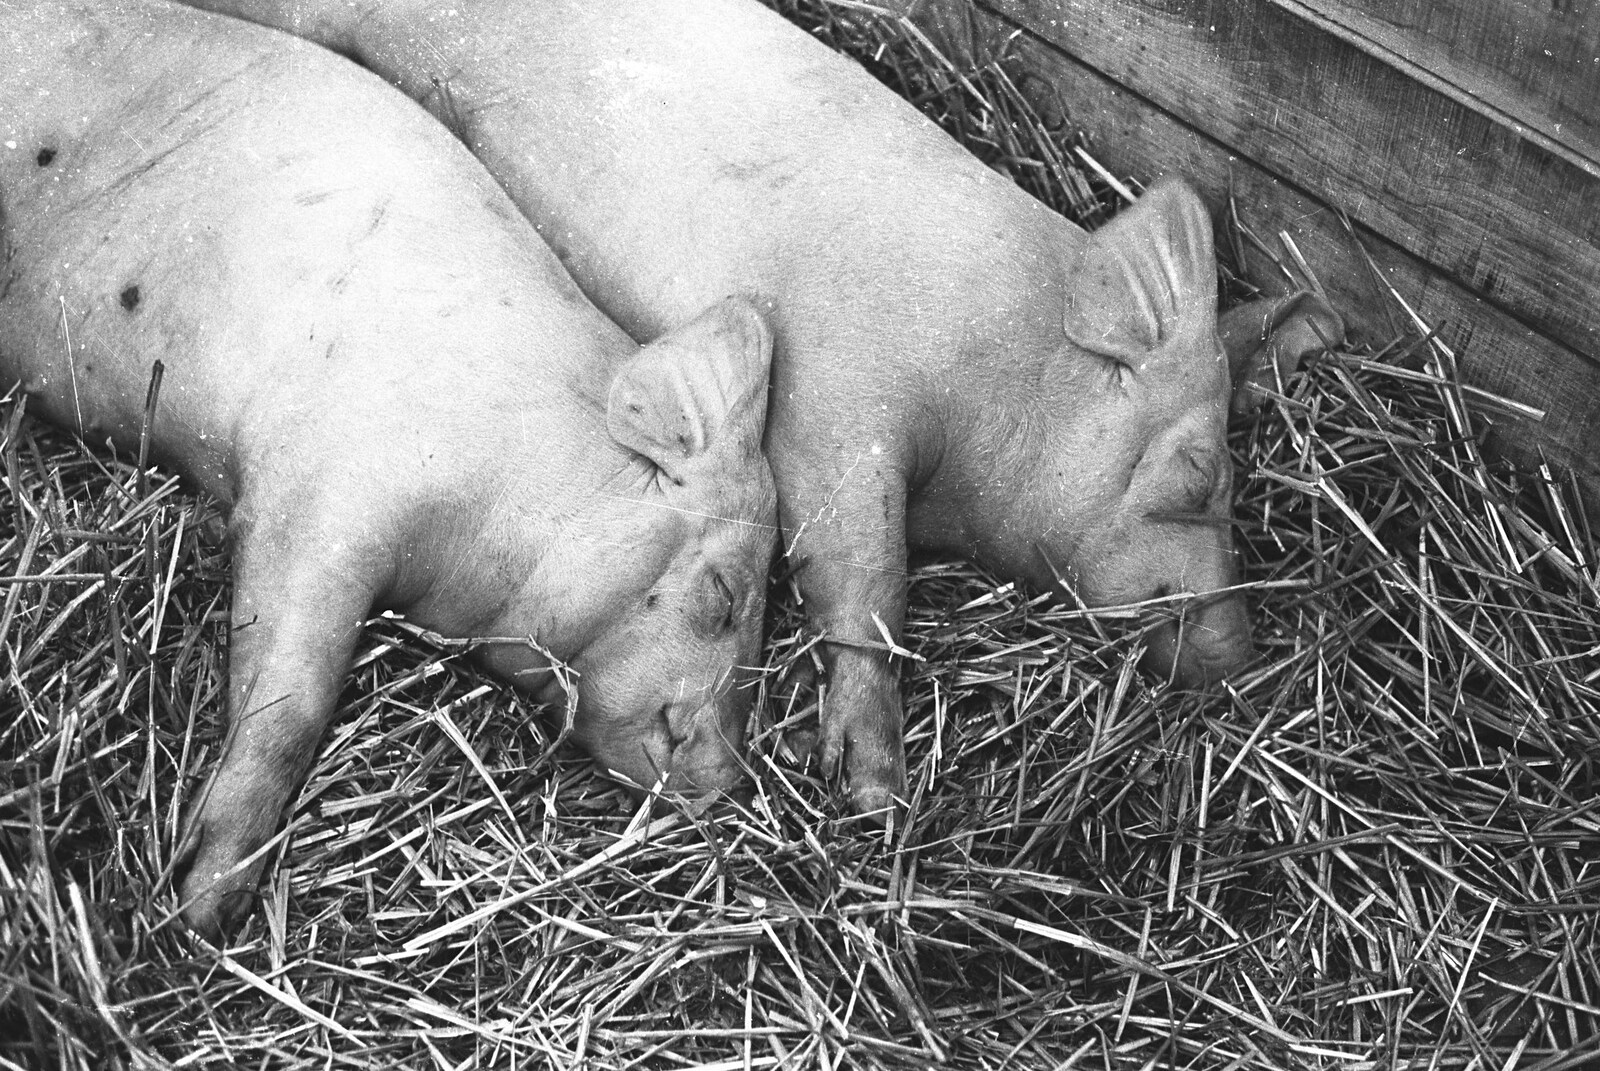 A couple of sleeping pigs from The Royal Norfolk Show, Costessey Showground, Norwich - June 20th 1994